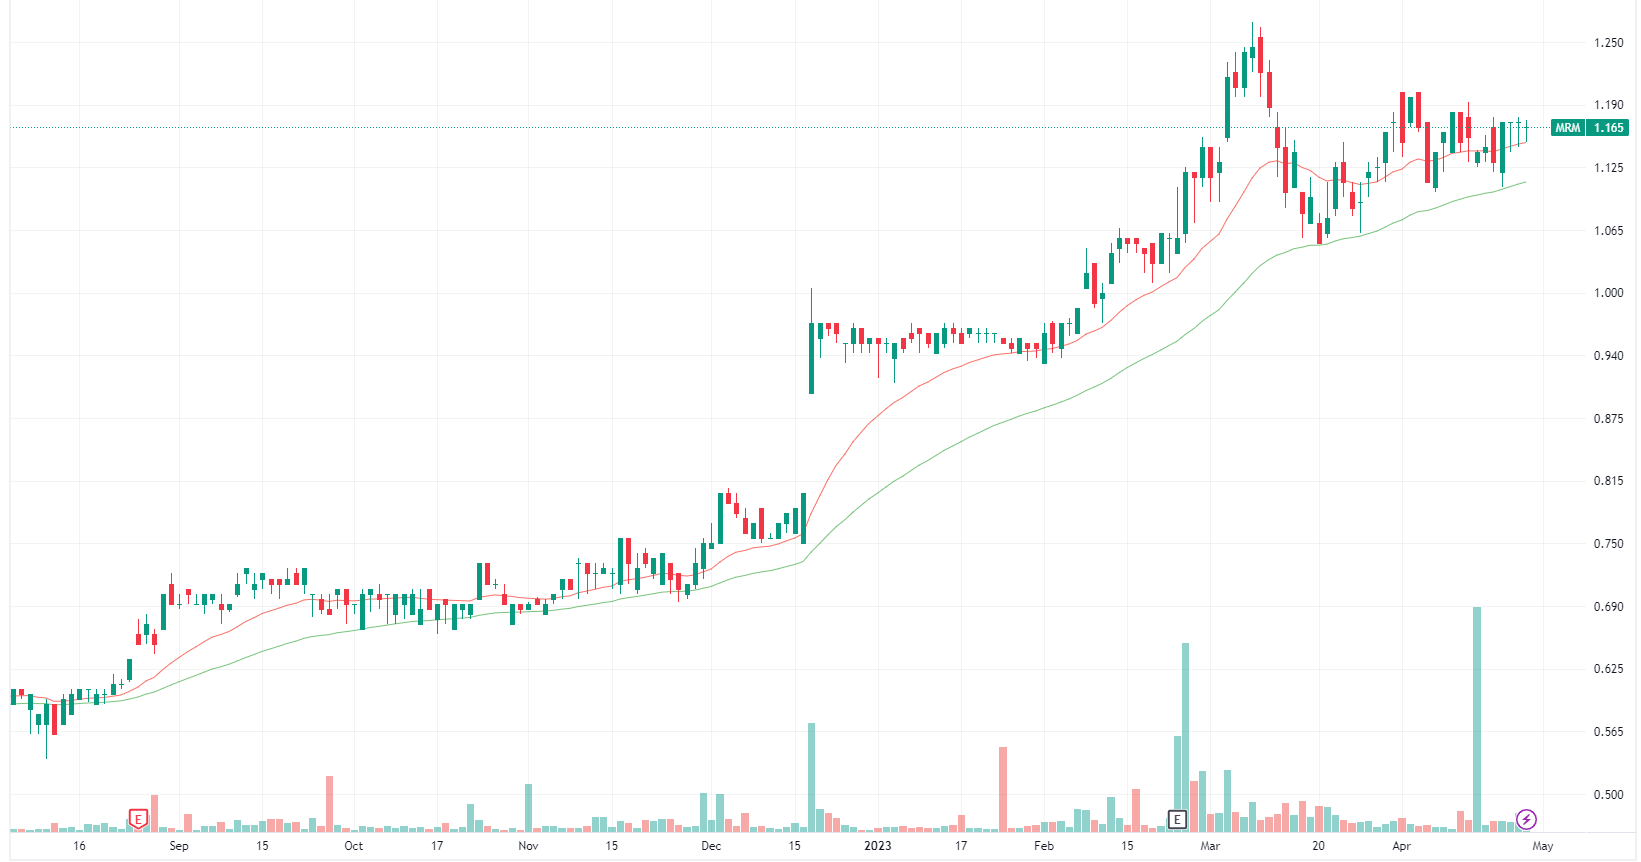 MMA Offshore chart (Source: TradingView)